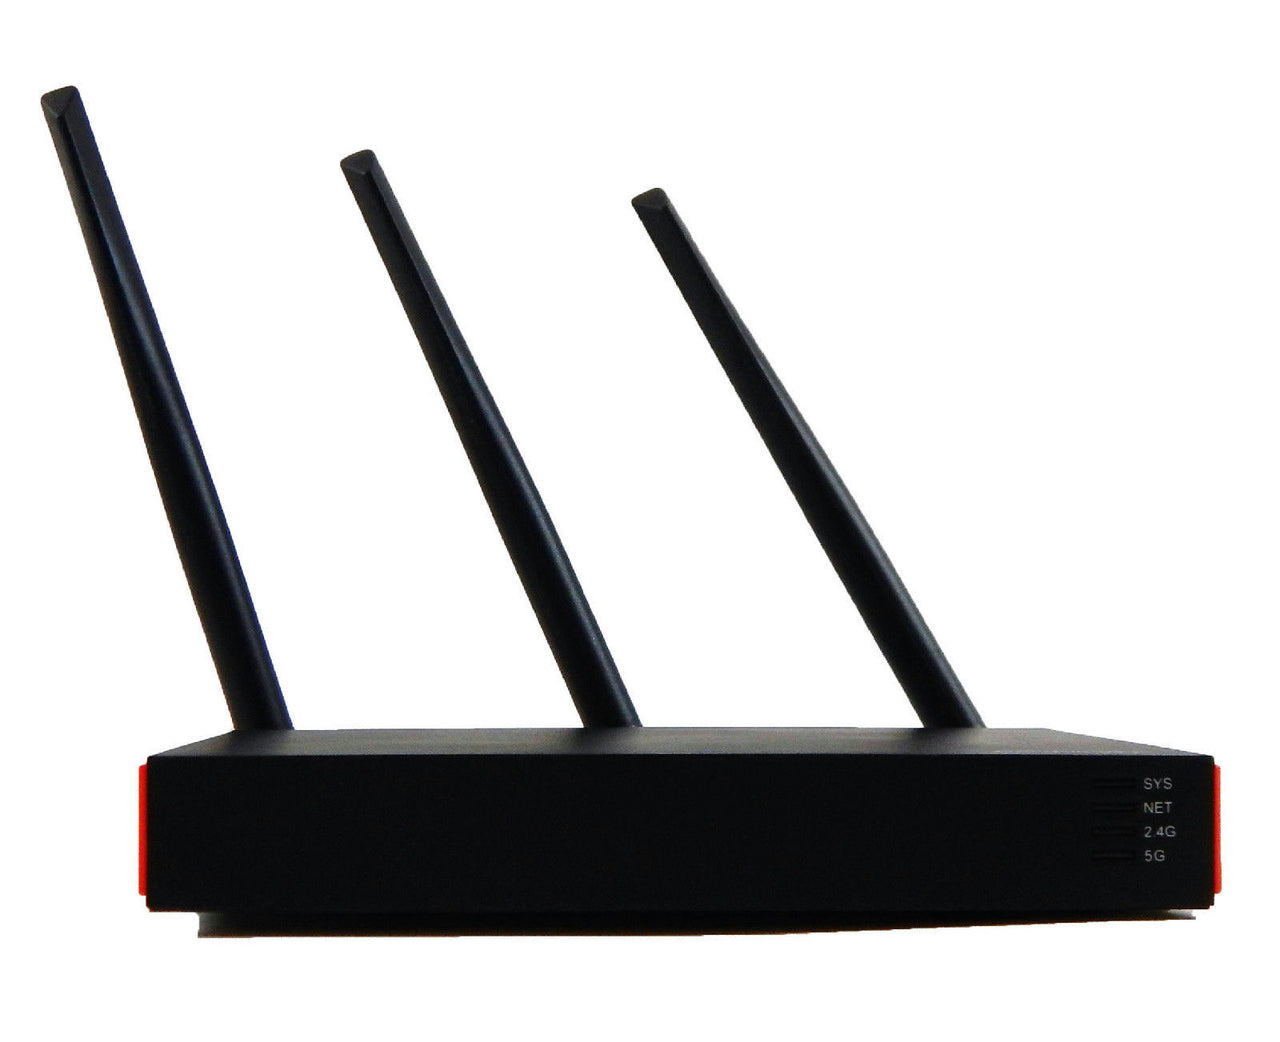 AC750 Dual-Band Wi-Fi Router